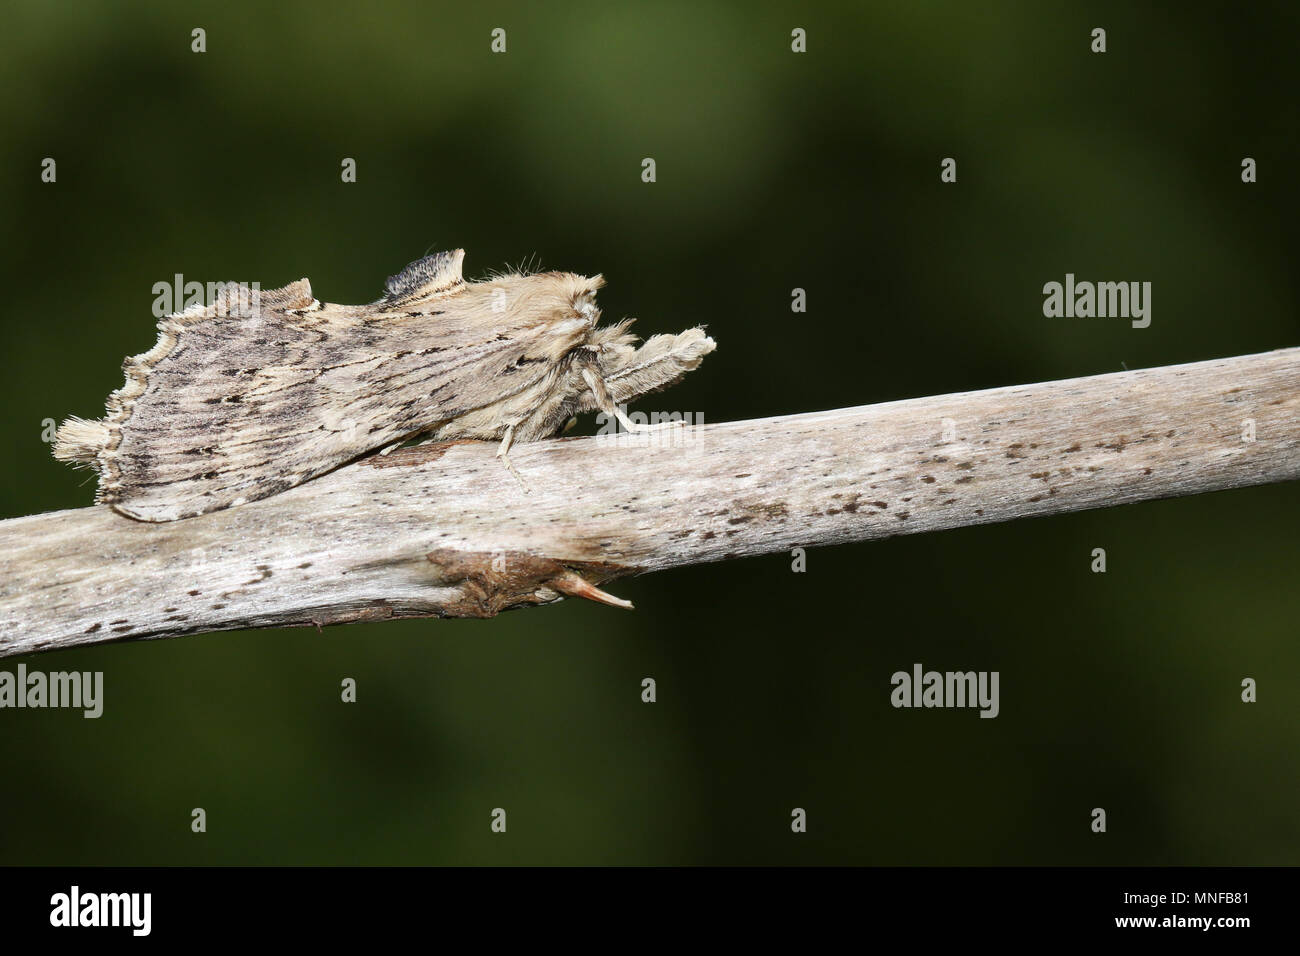 A stunning Pale Prominent (Pterostoma palpina) perched on the stem of a plant. Stock Photo